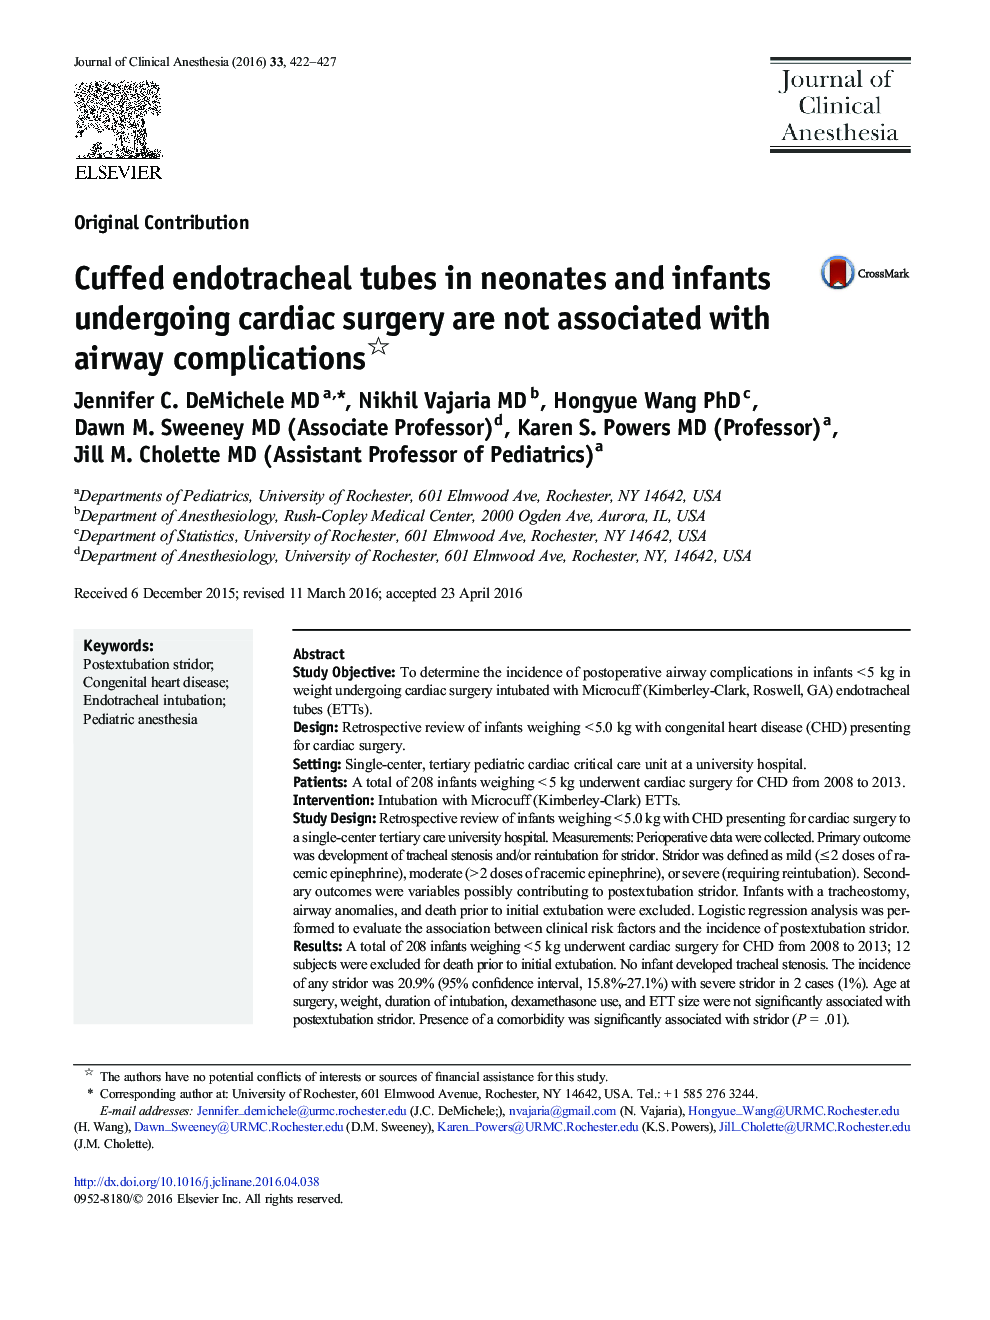 Cuffed endotracheal tubes in neonates and infants undergoing cardiac surgery are not associated with airway complications 